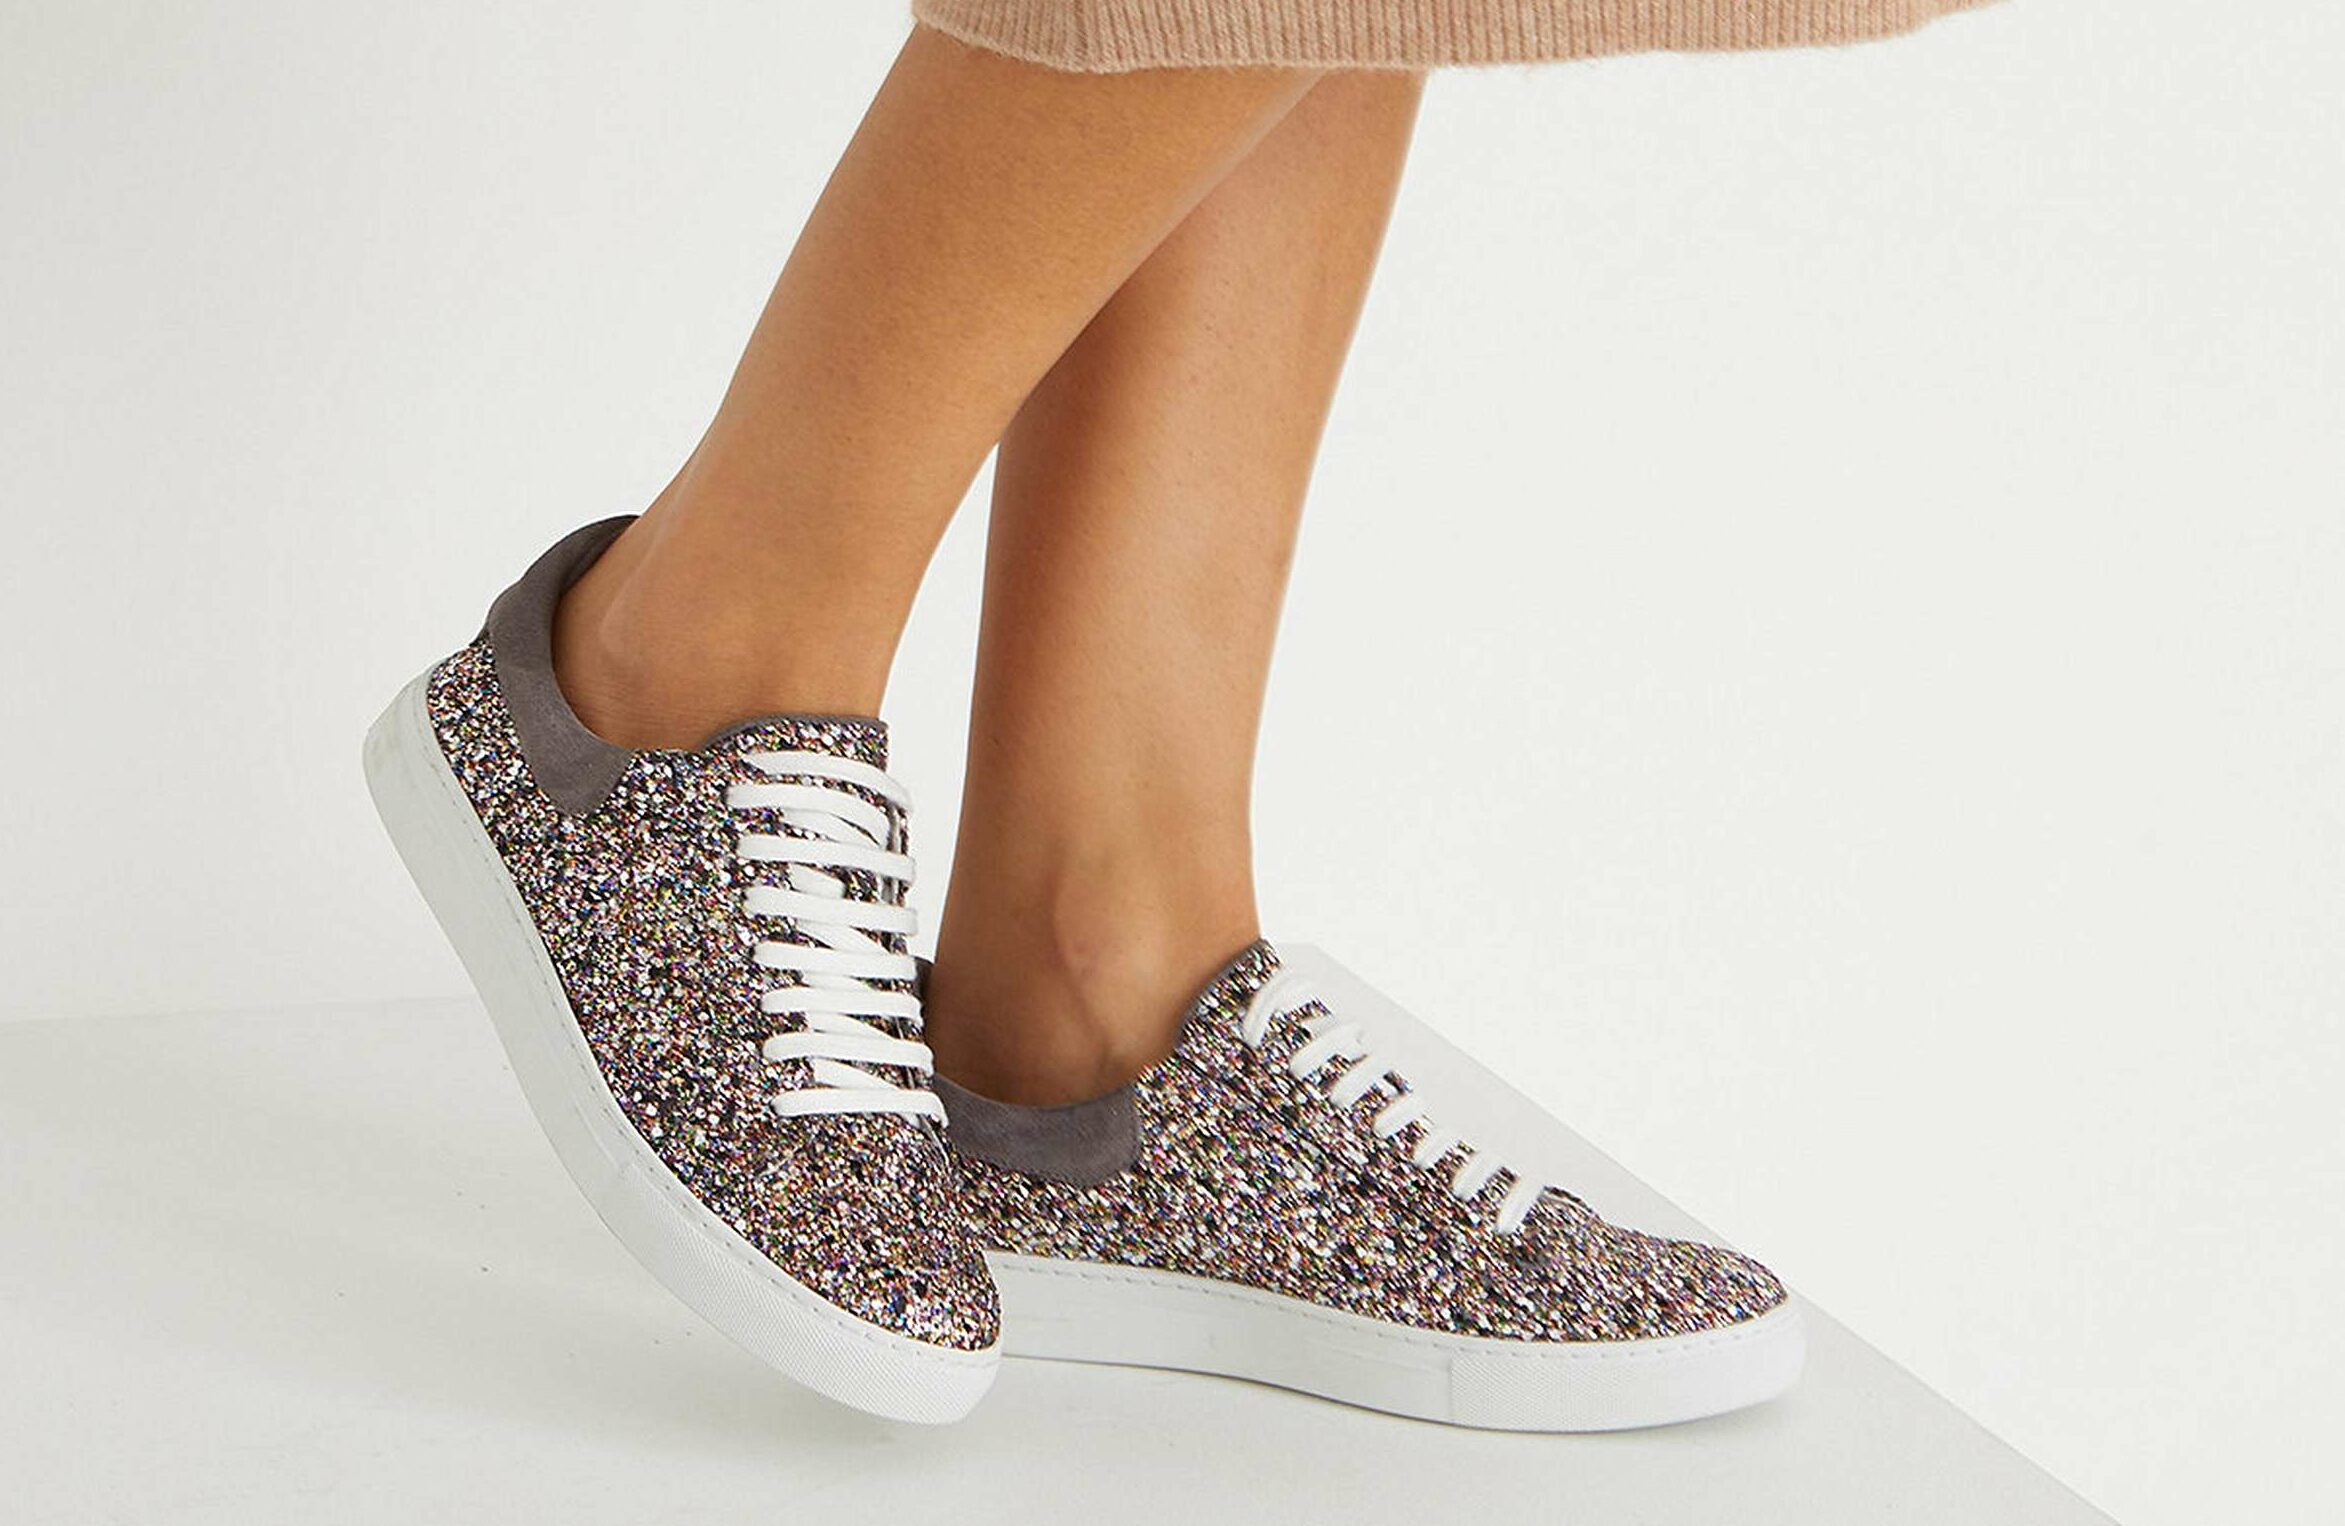 trainers with glitter